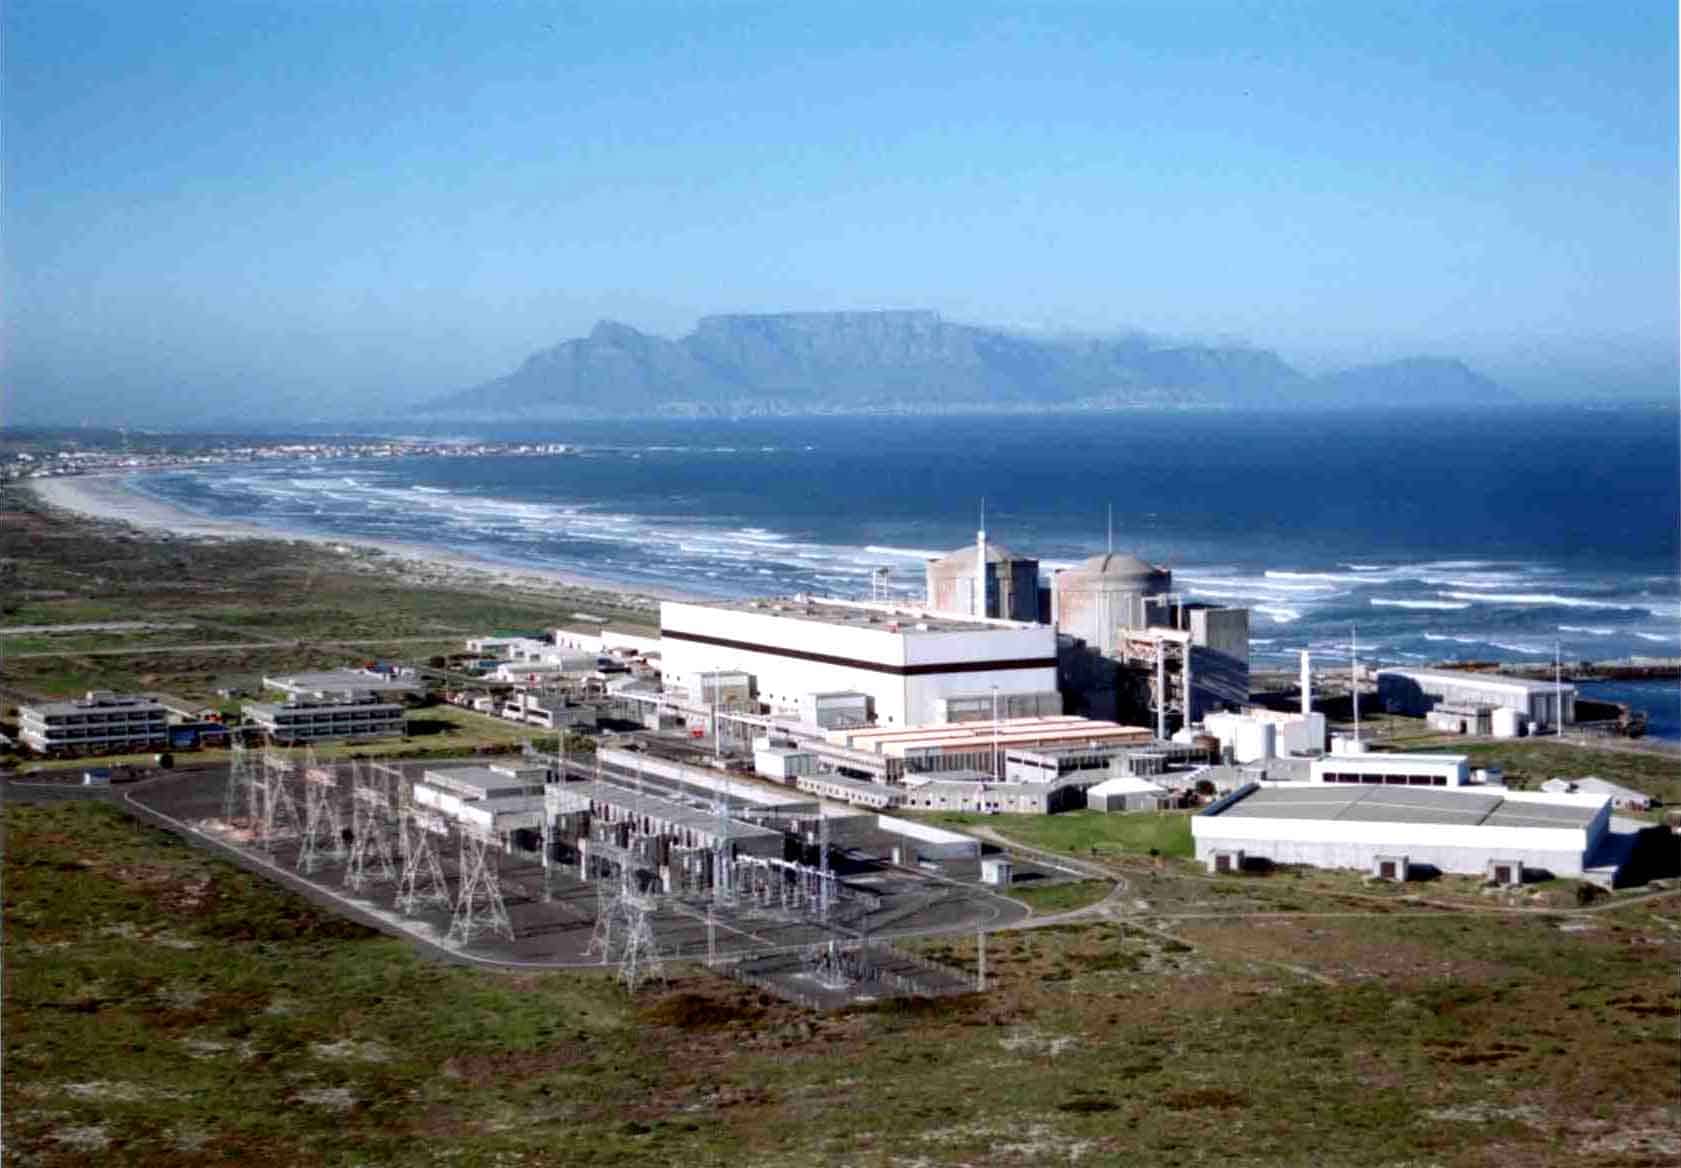 South Africa's only nuclear power station in Koeberg, close to the Atlantic Ocean. (c) Bjorn Rudner